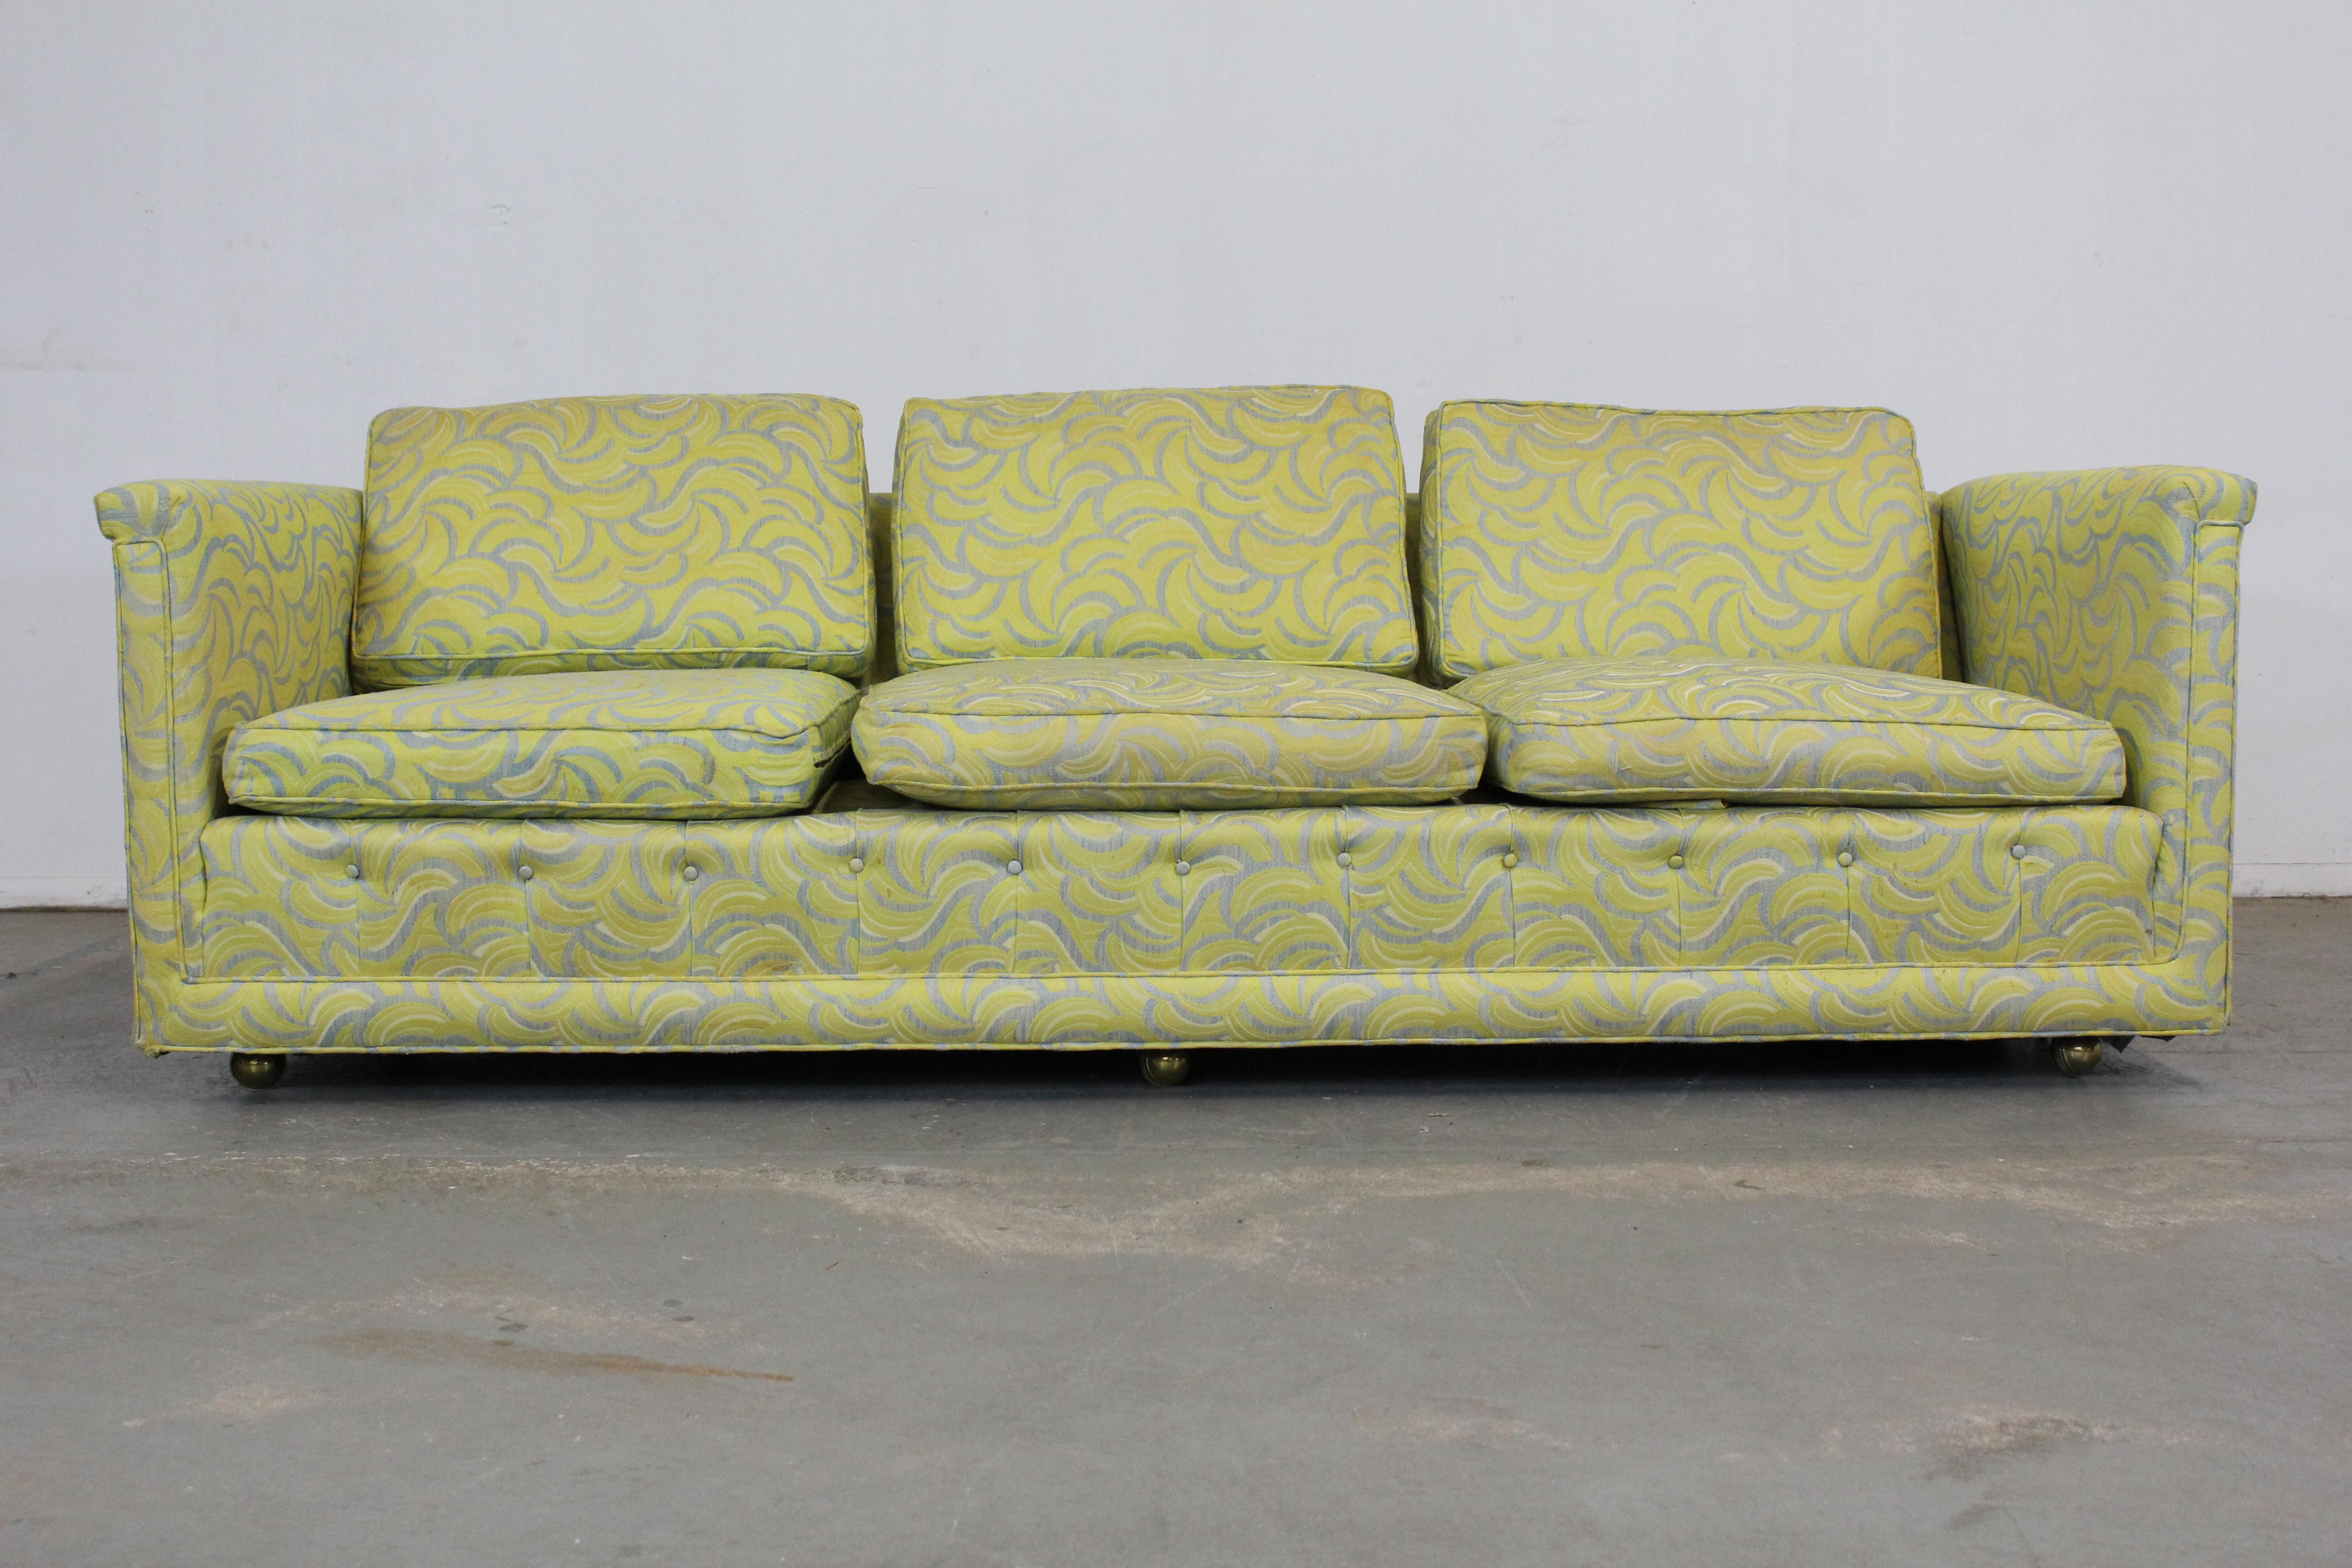 Mid-Century Modern Milo Baughman style sofa

Offered is a Mid-Century Modern sofa. Has three removable cushions and is on castors. It is in great structurally sound condition considering its age with torn upholstery. It is not signed. Will need